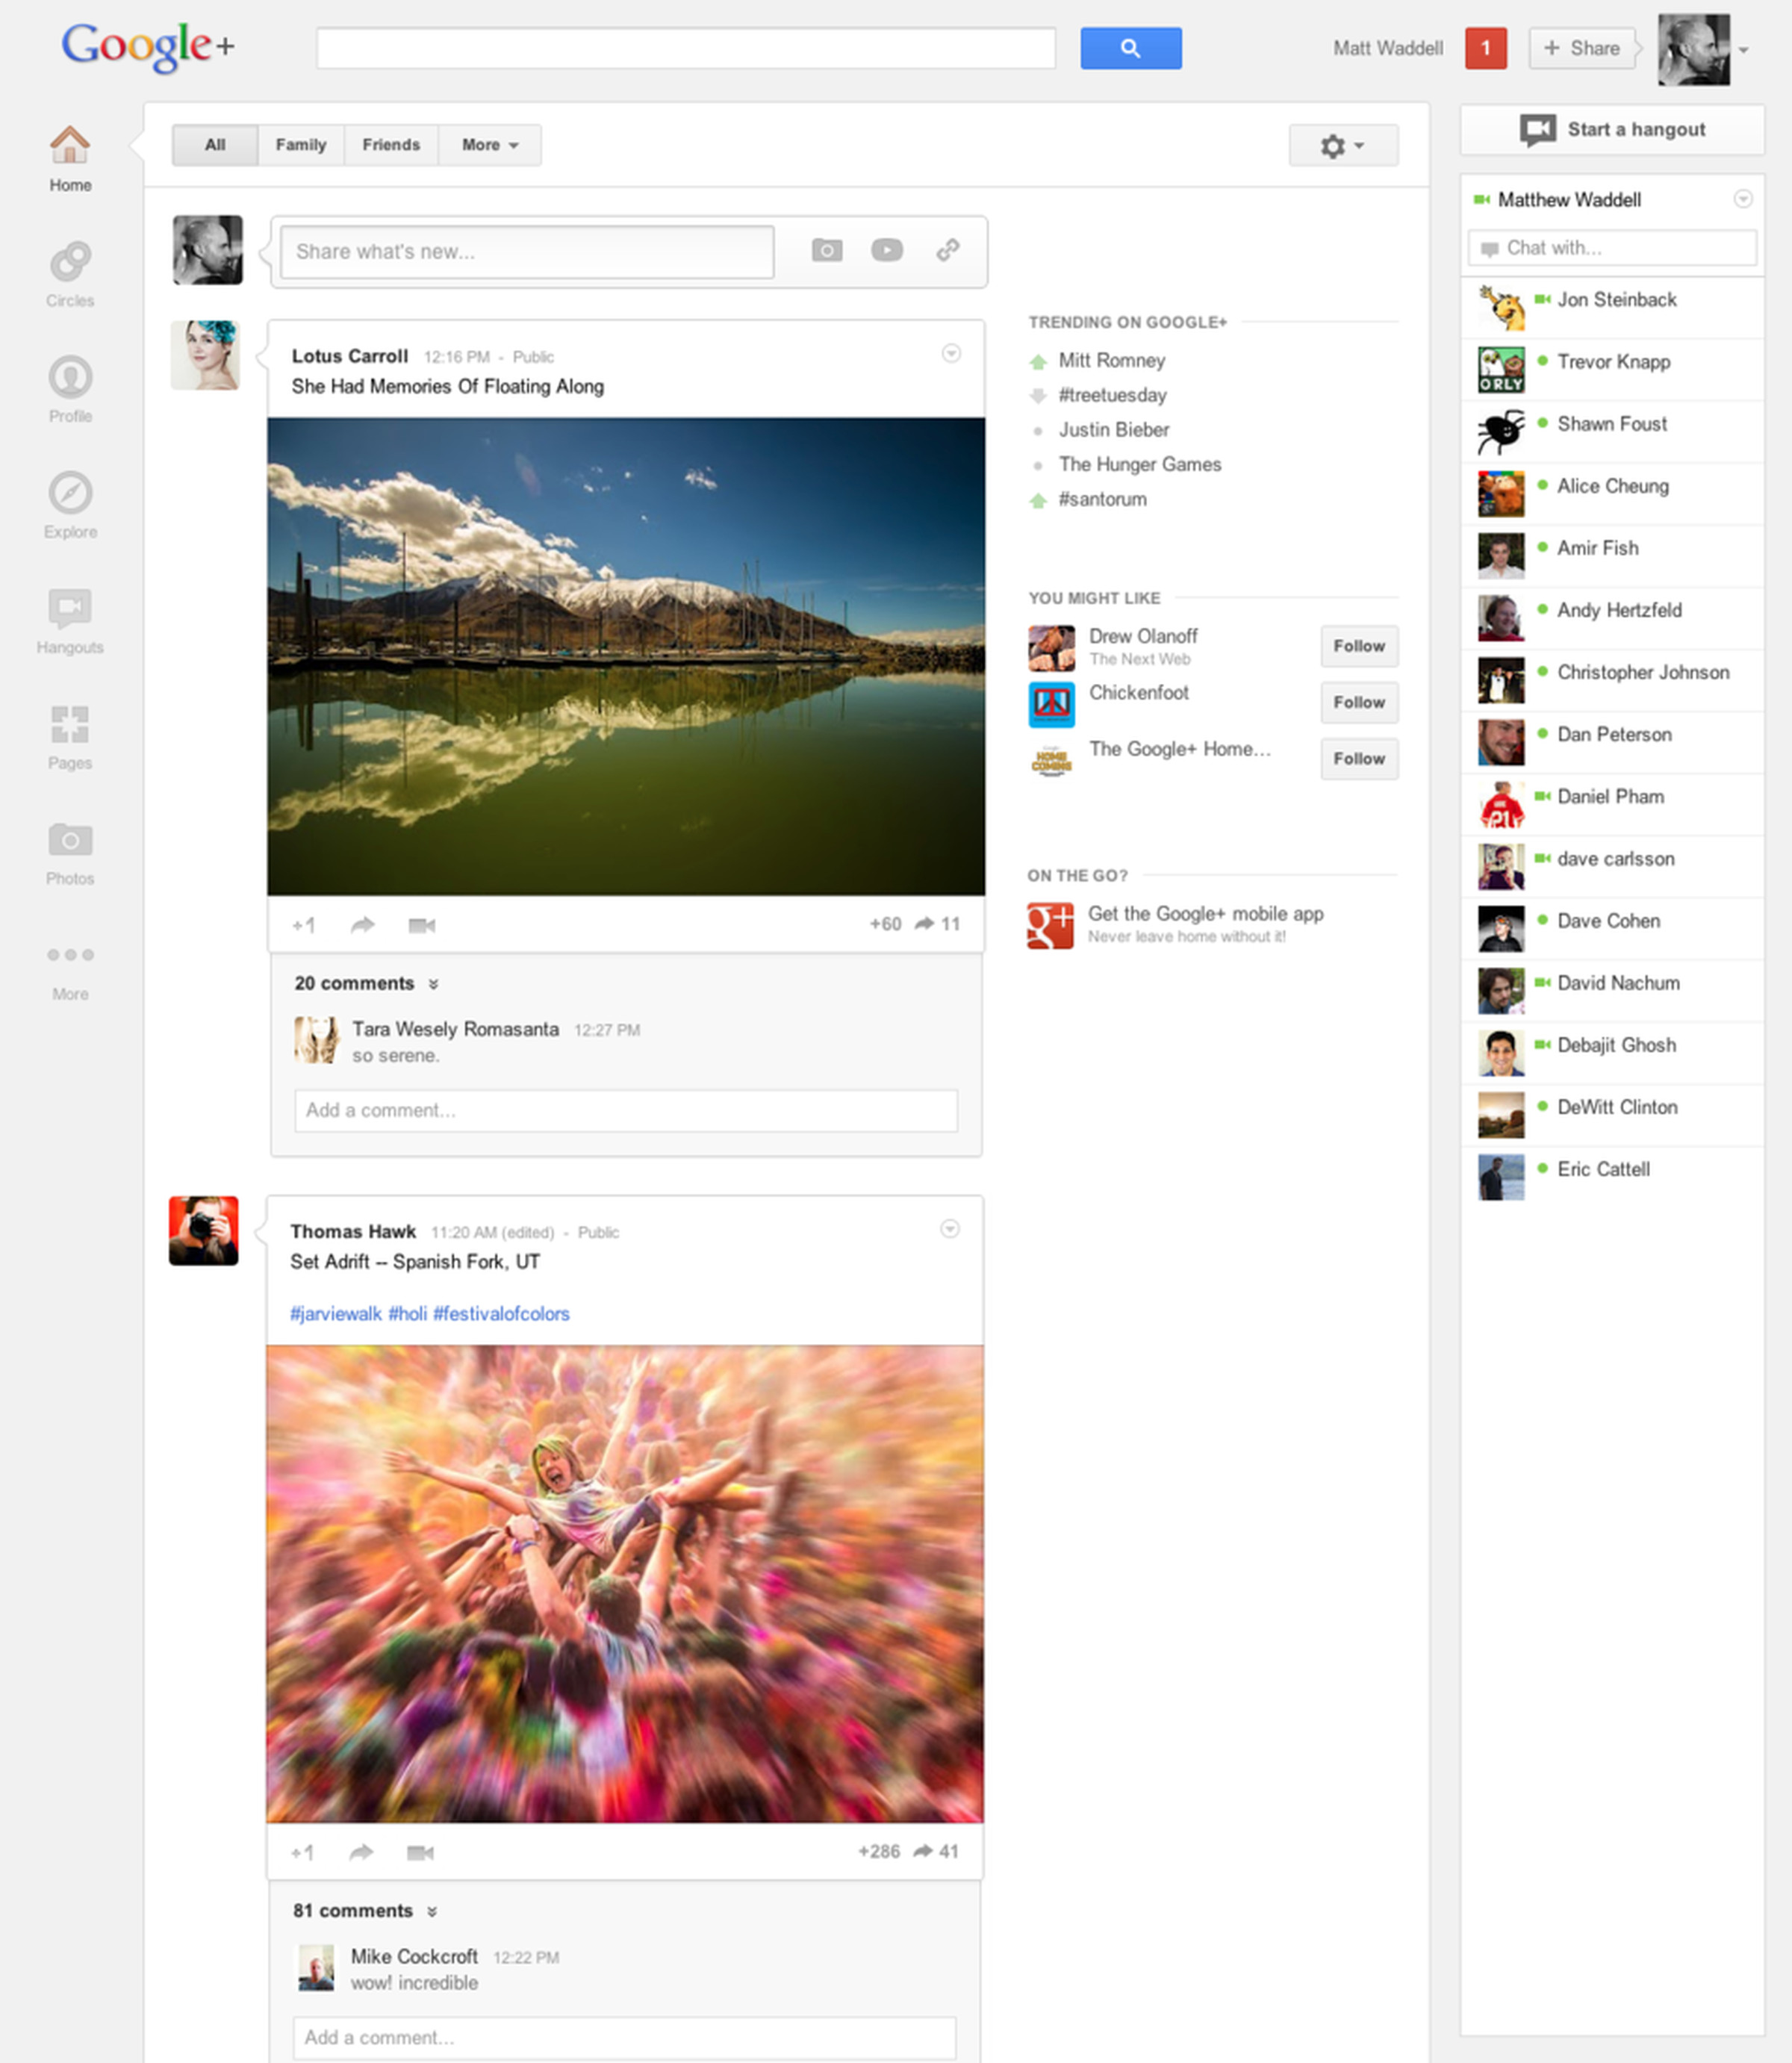 Google+ redesign pictures